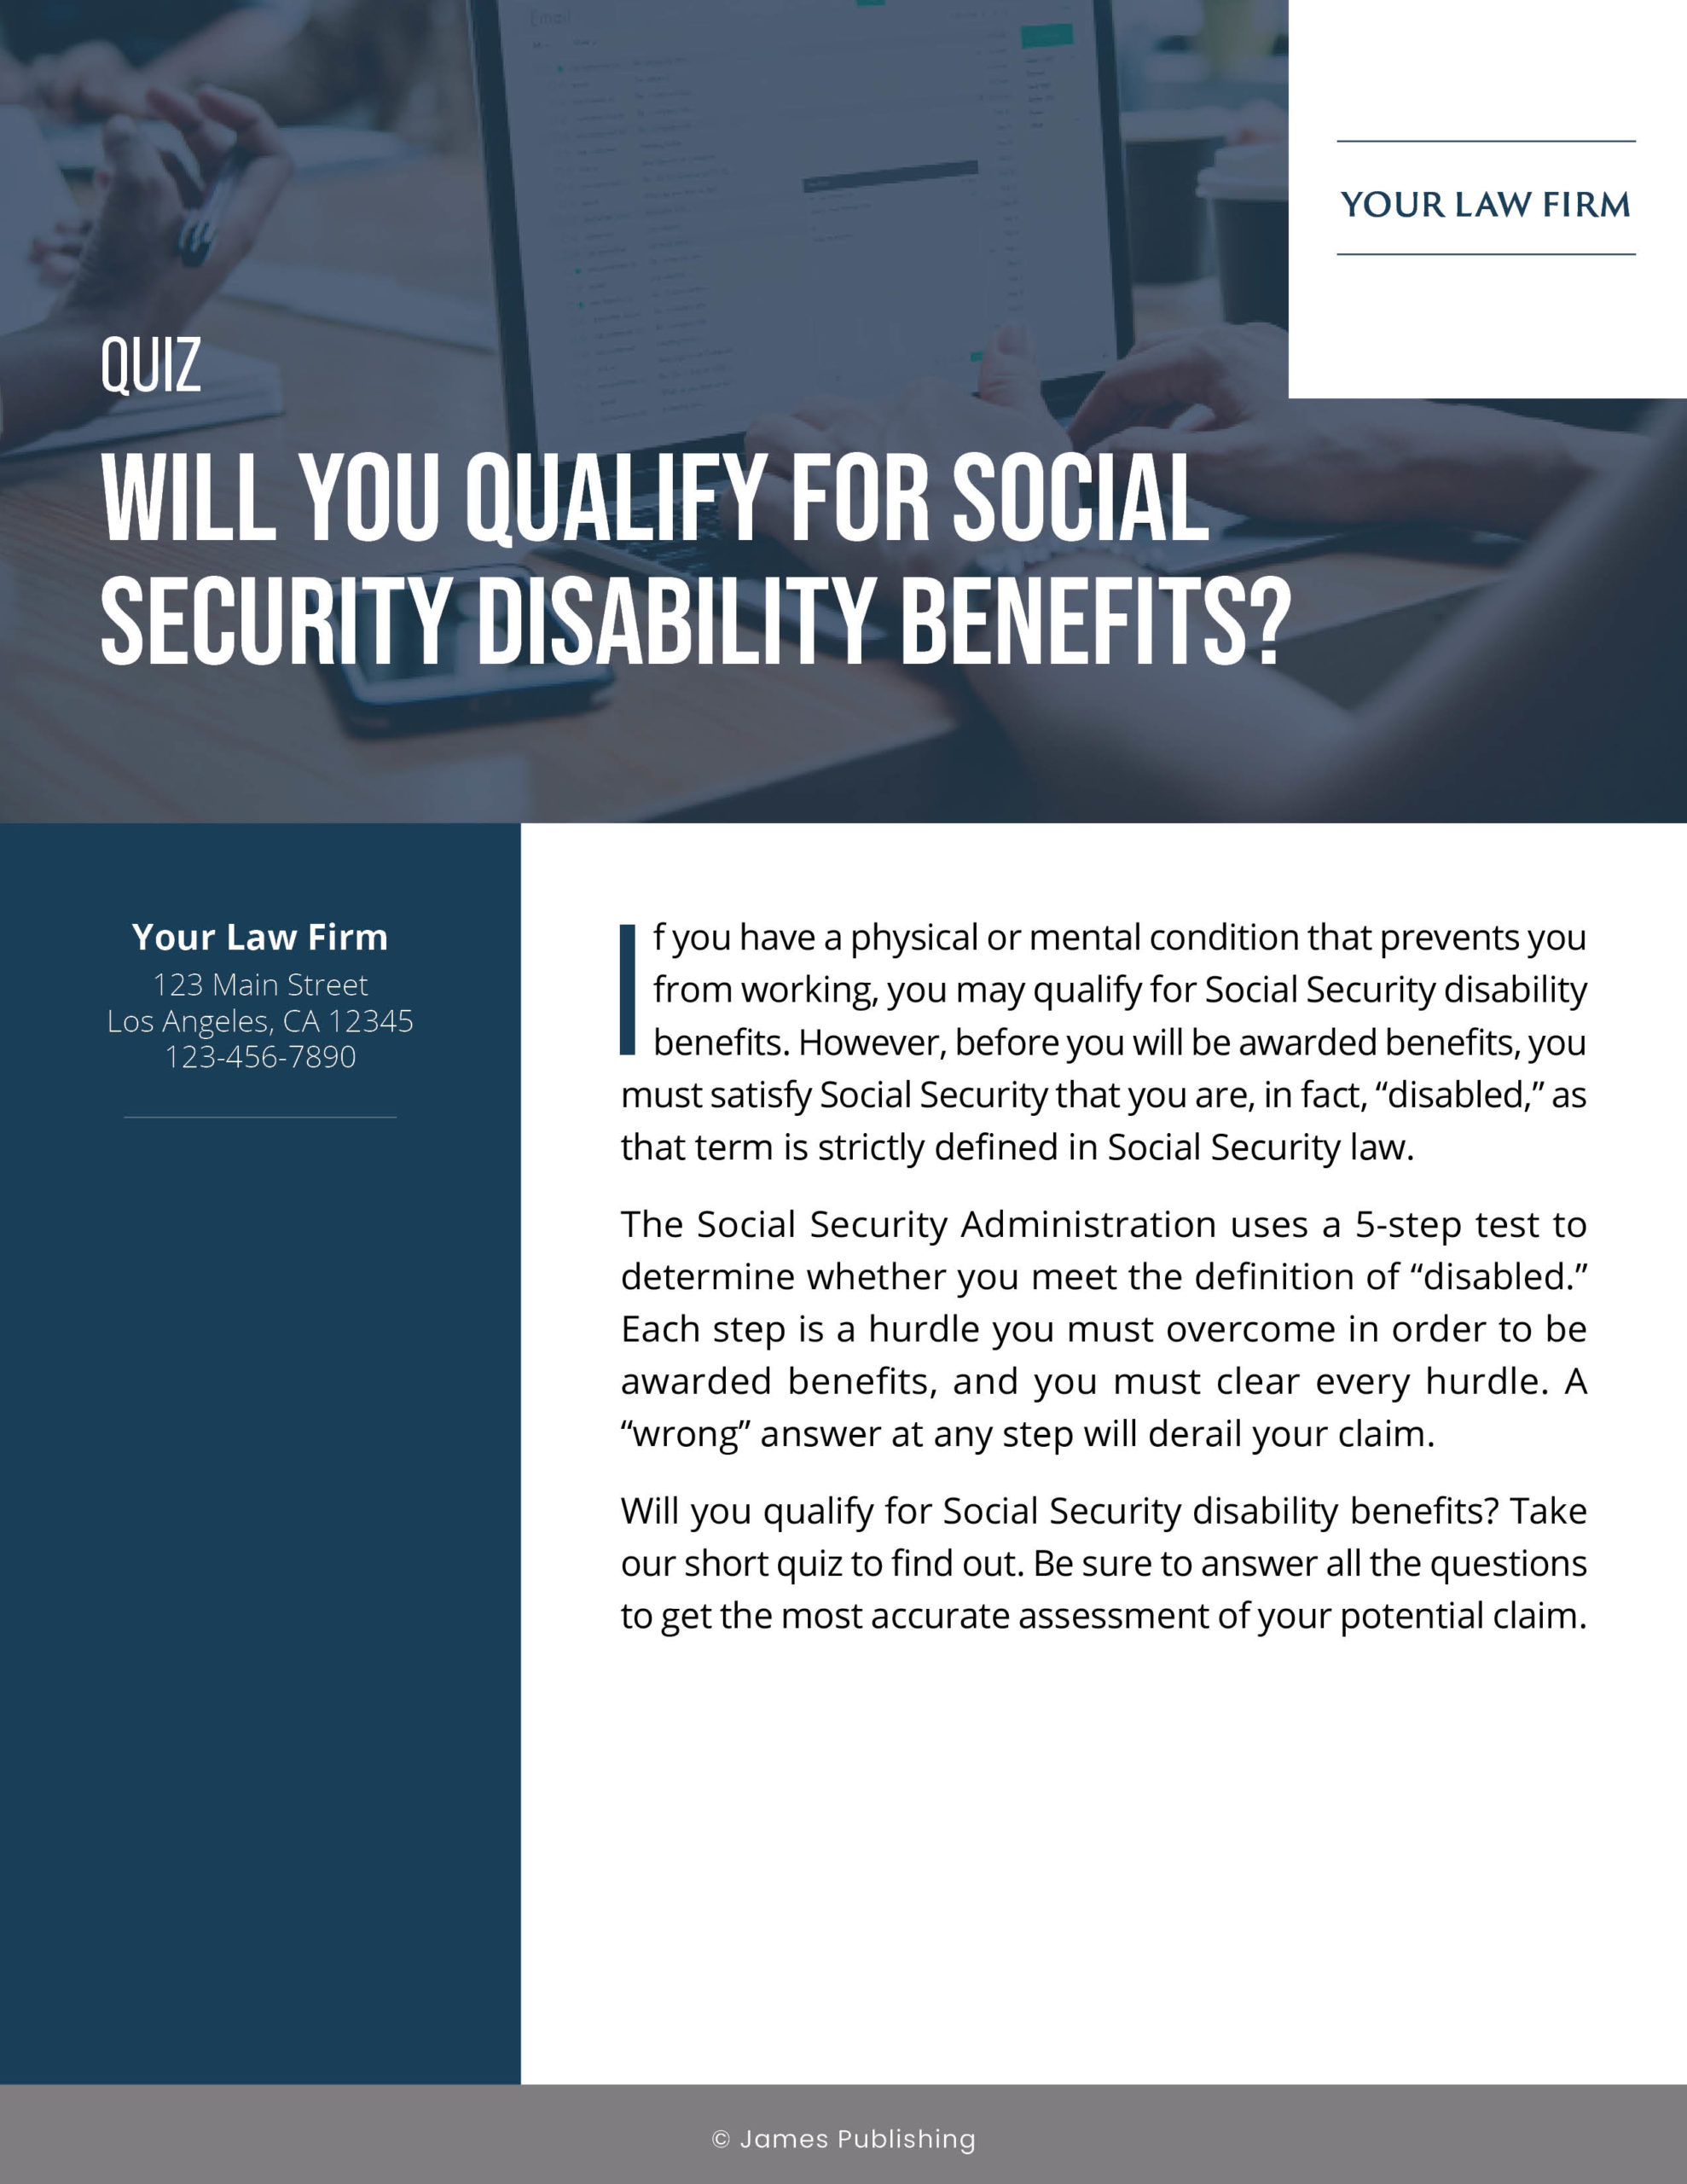 SSD-02 Quiz - Will You Qualify for Social Security Disability Benefits